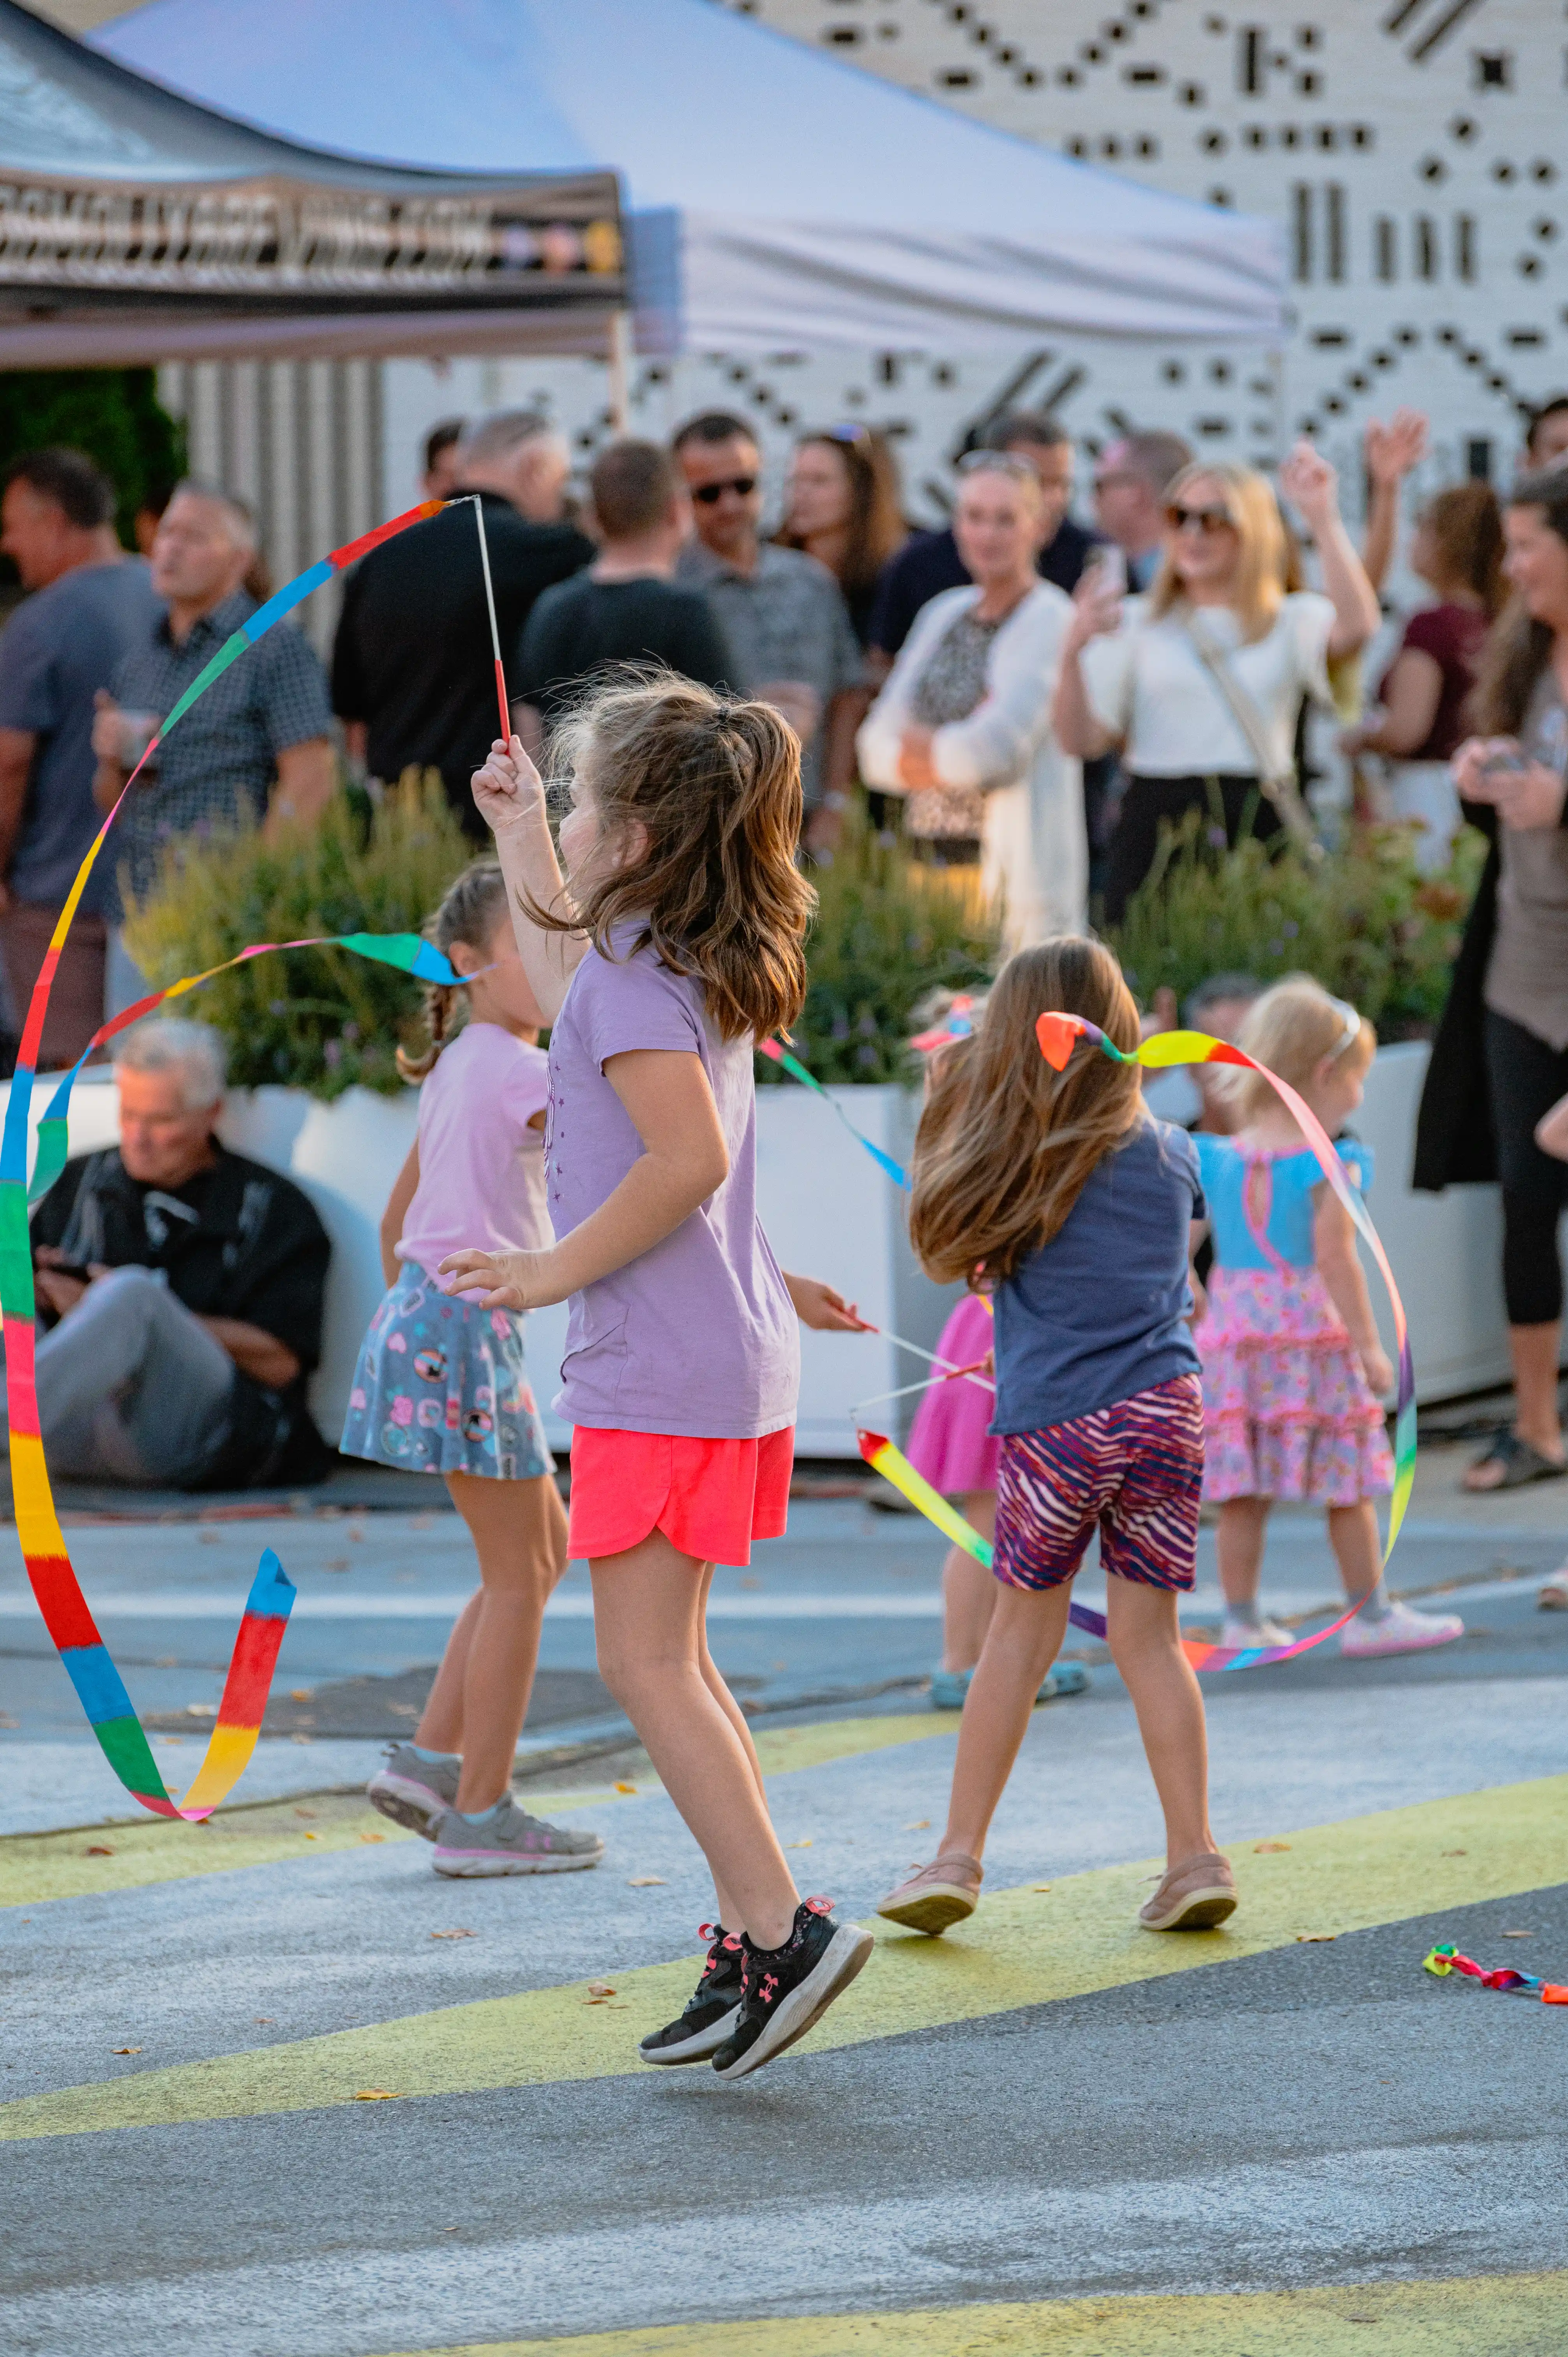 Children playing with colorful ribbons at an outdoor event with onlookers in the background.